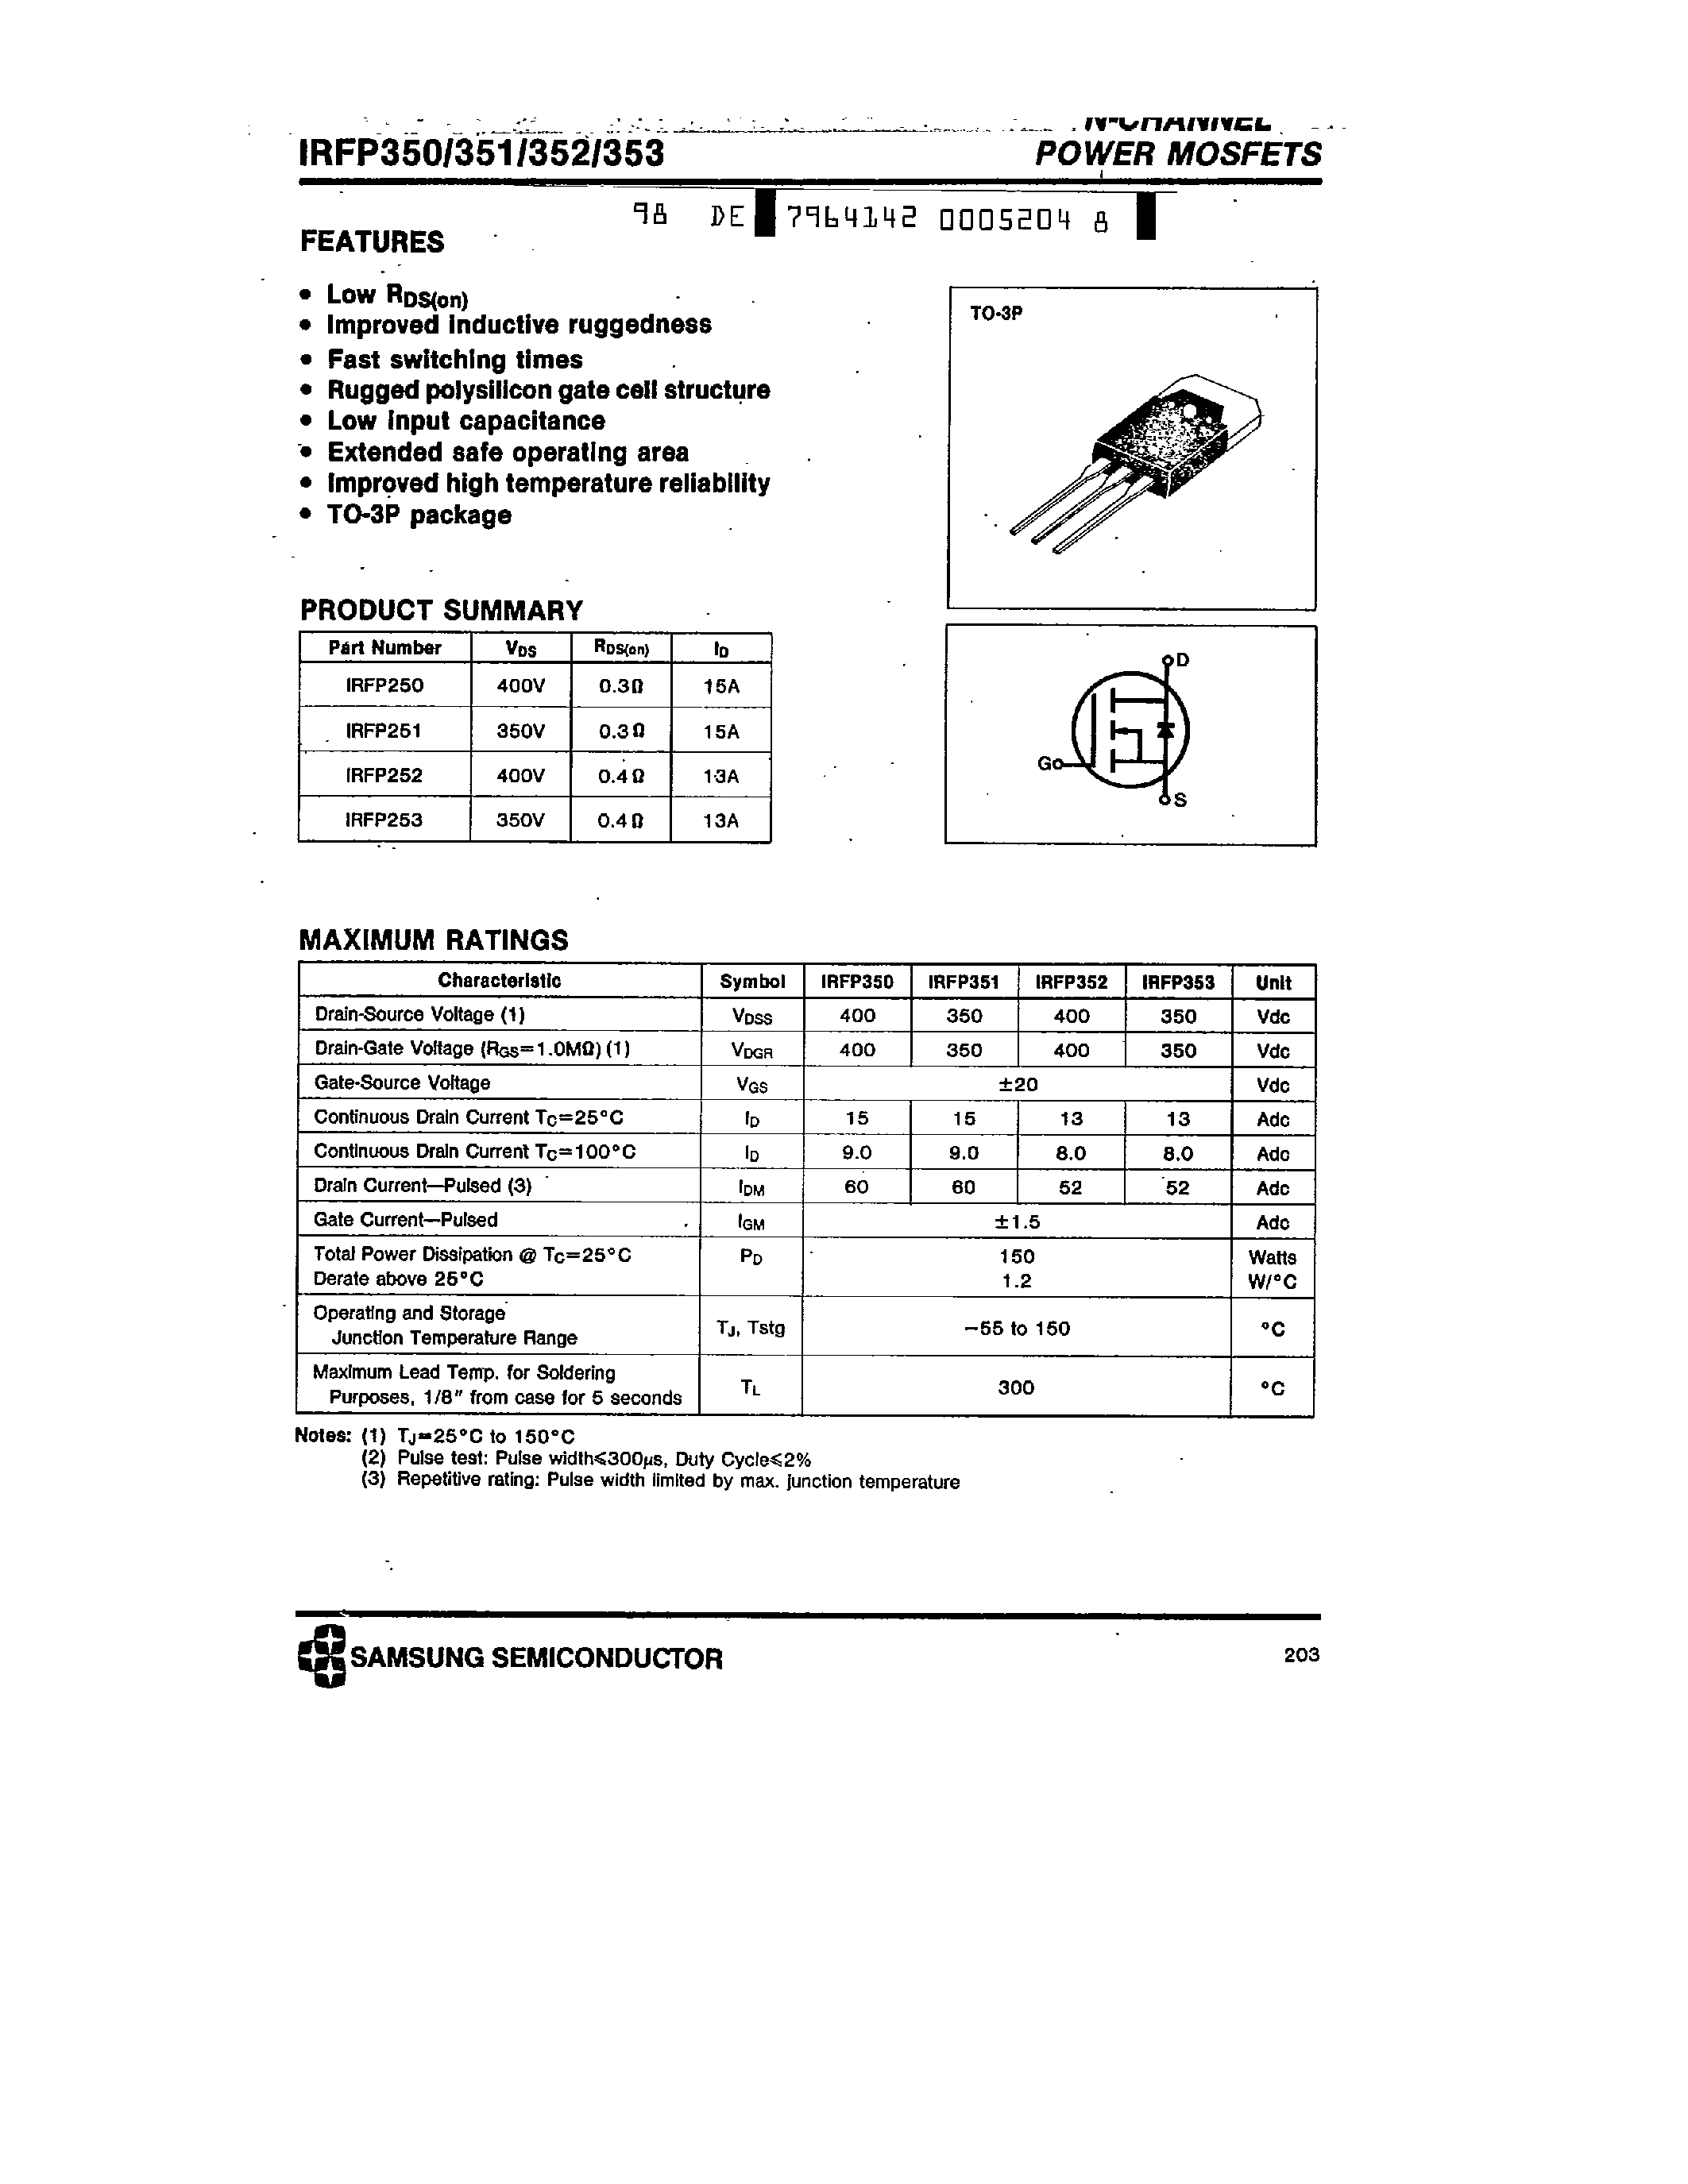 Даташит IRFP350-(IRFP350 - IRFP353) N-CHANNEL POWER MOSFETS страница 1